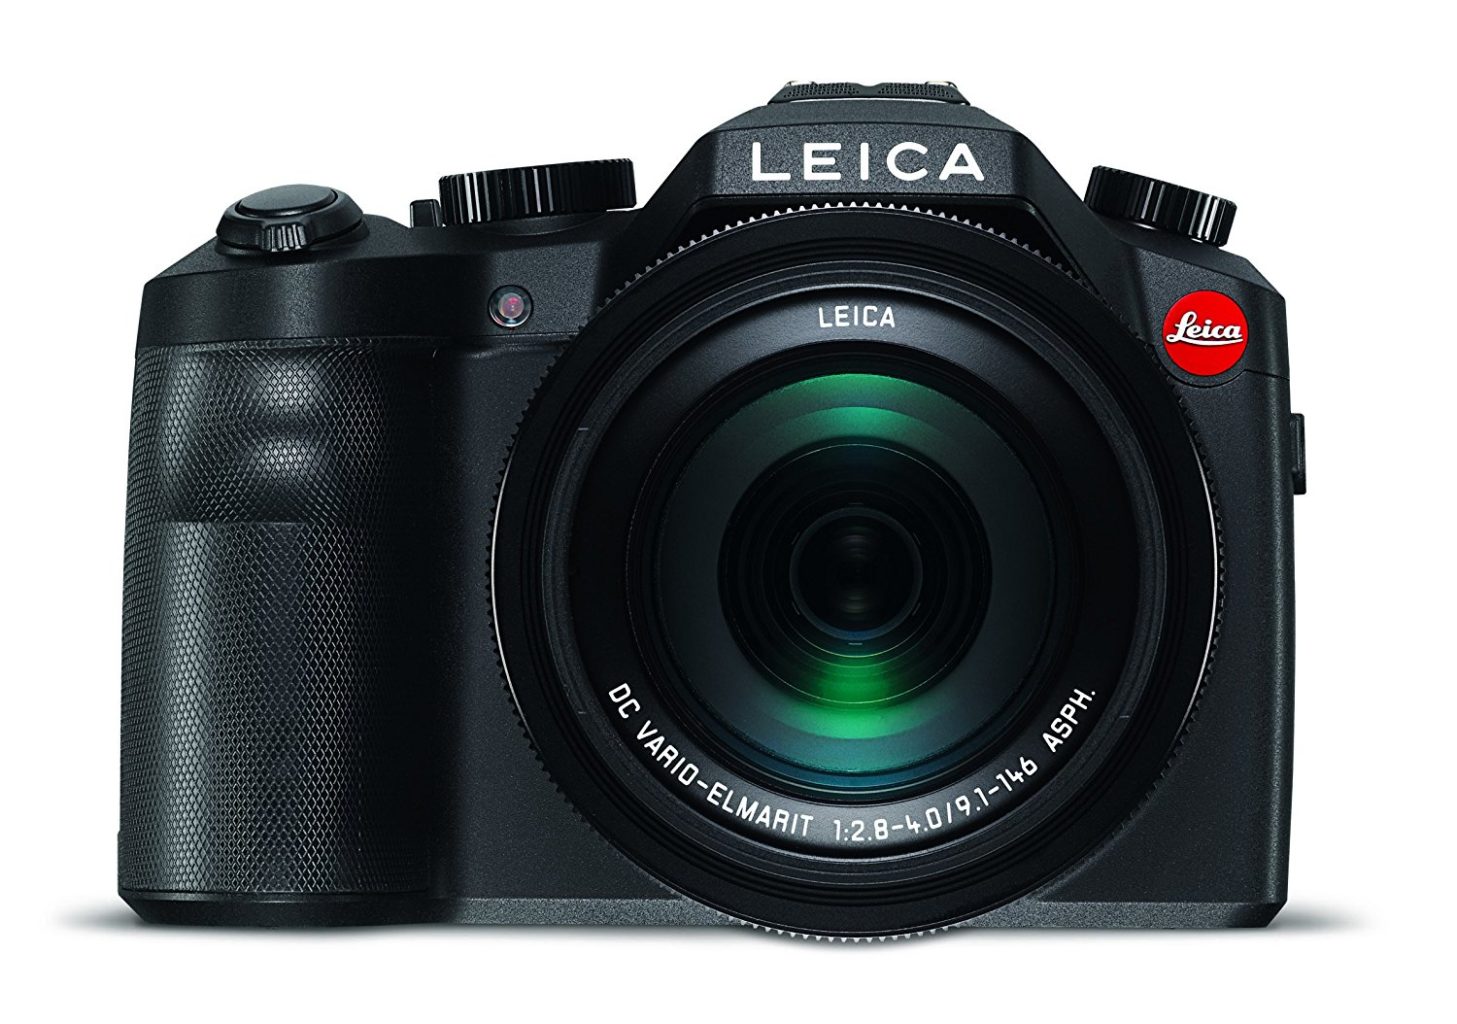 Buy Leica Cameras Exclusively on Amazon India: Leica Partnering With Amazon